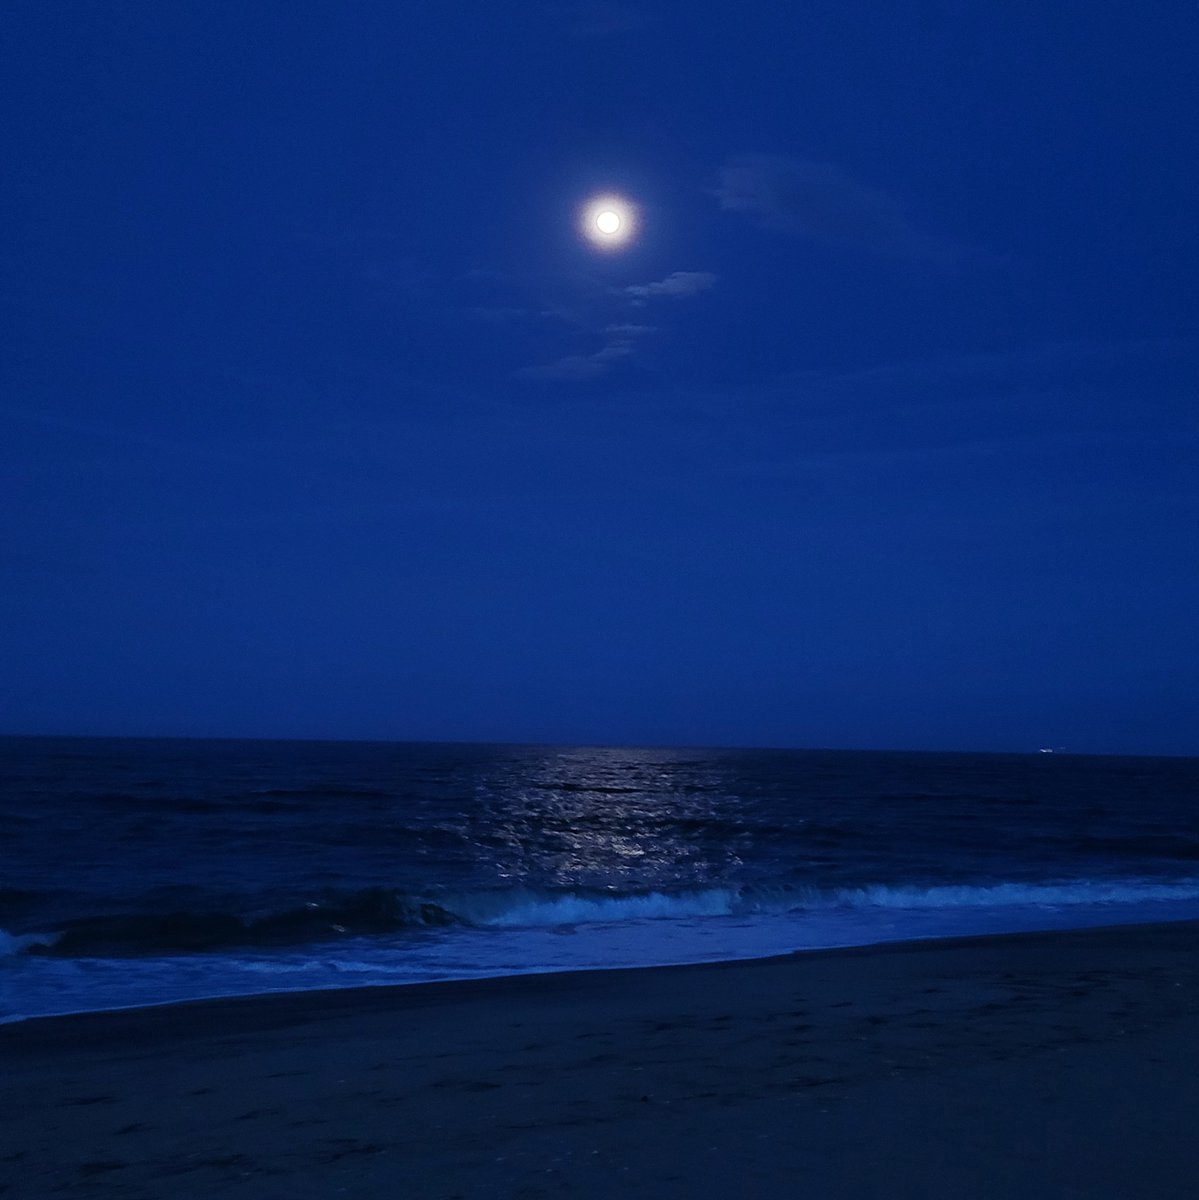 The Full Moon is a week away! Visit our EventBrite page to reserve your spot for our Jamaica Bay and Sandy Hook Full Moon programs! #GatewayNPS eventbrite.com/o/gateway-nati…